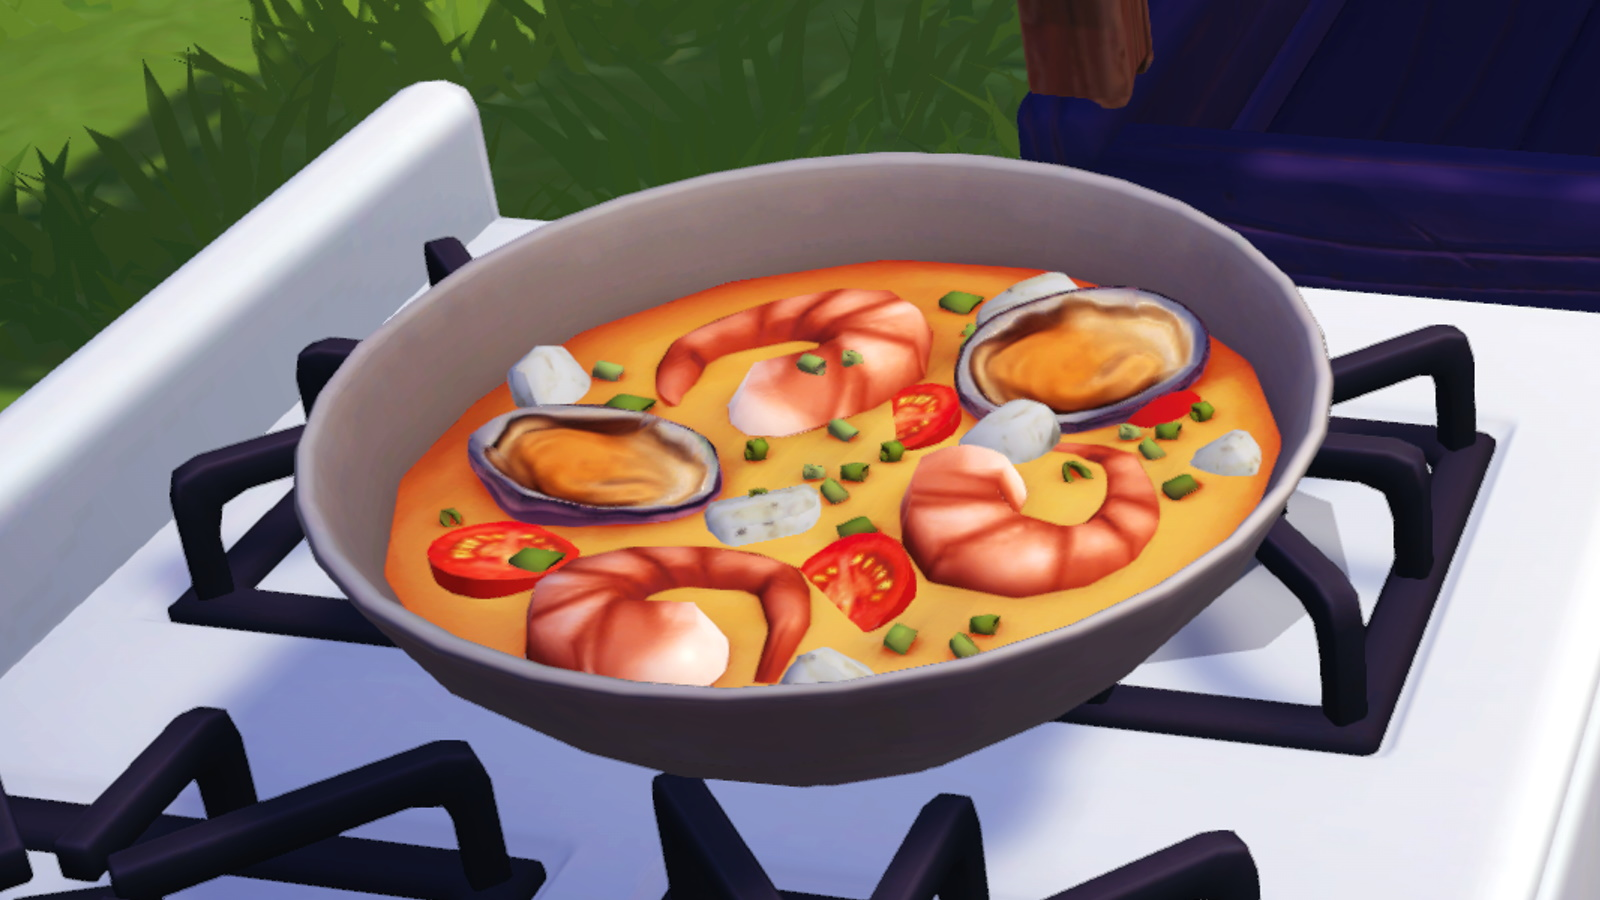 Cooking Simulator on X: In case you've missed it. Cooking